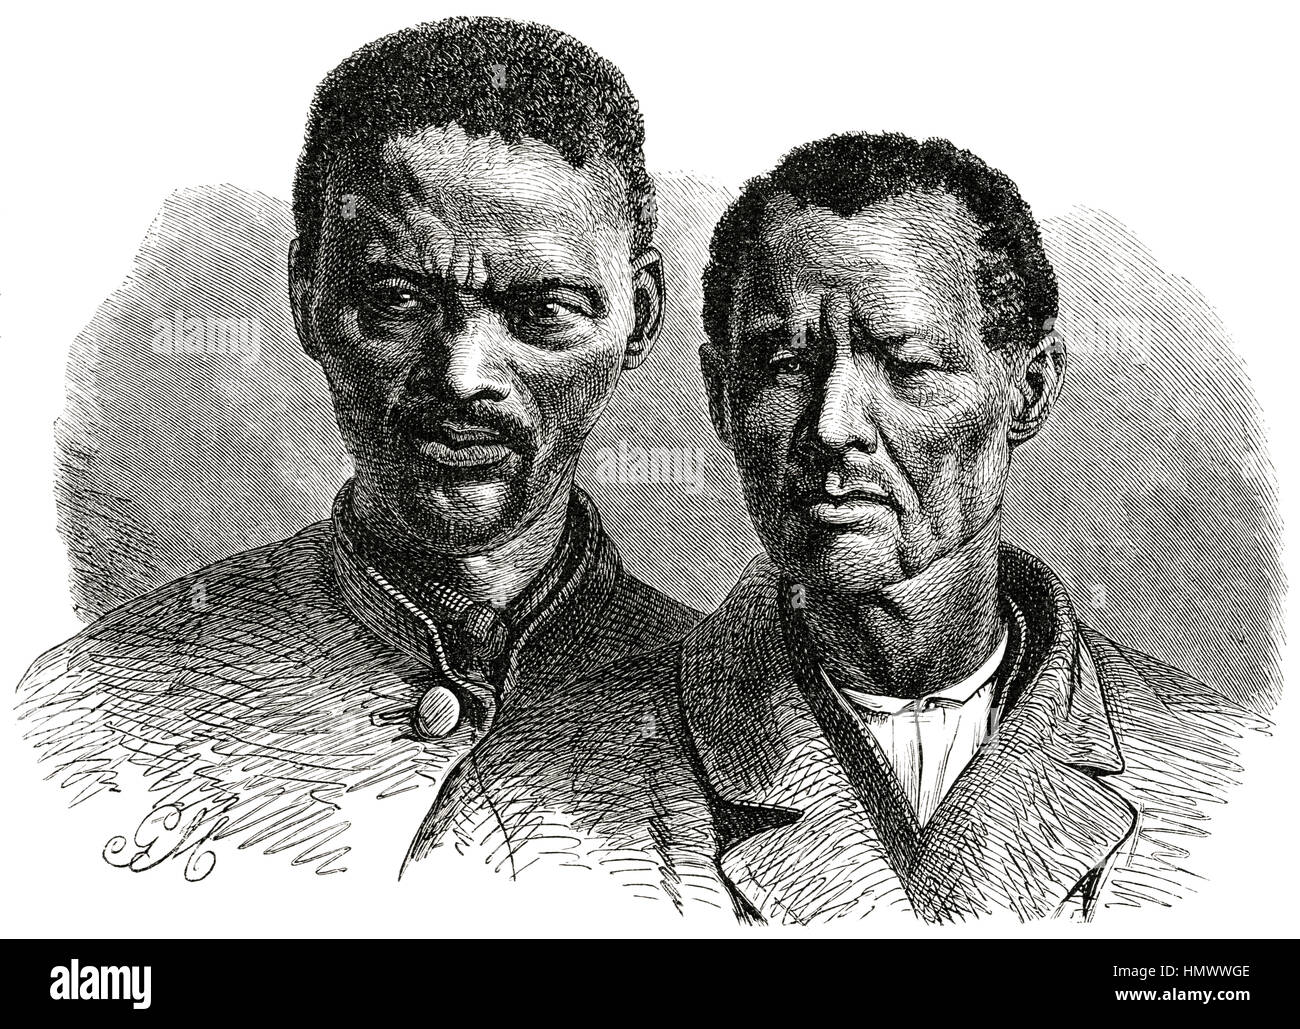 Two Namaquan Men, Southern Africa, Illustration from the book, 'Volkerkunde' by Dr. Fredrich Ratzel, Bibliographisches Institut, Leipzig, 1885 Stock Photo